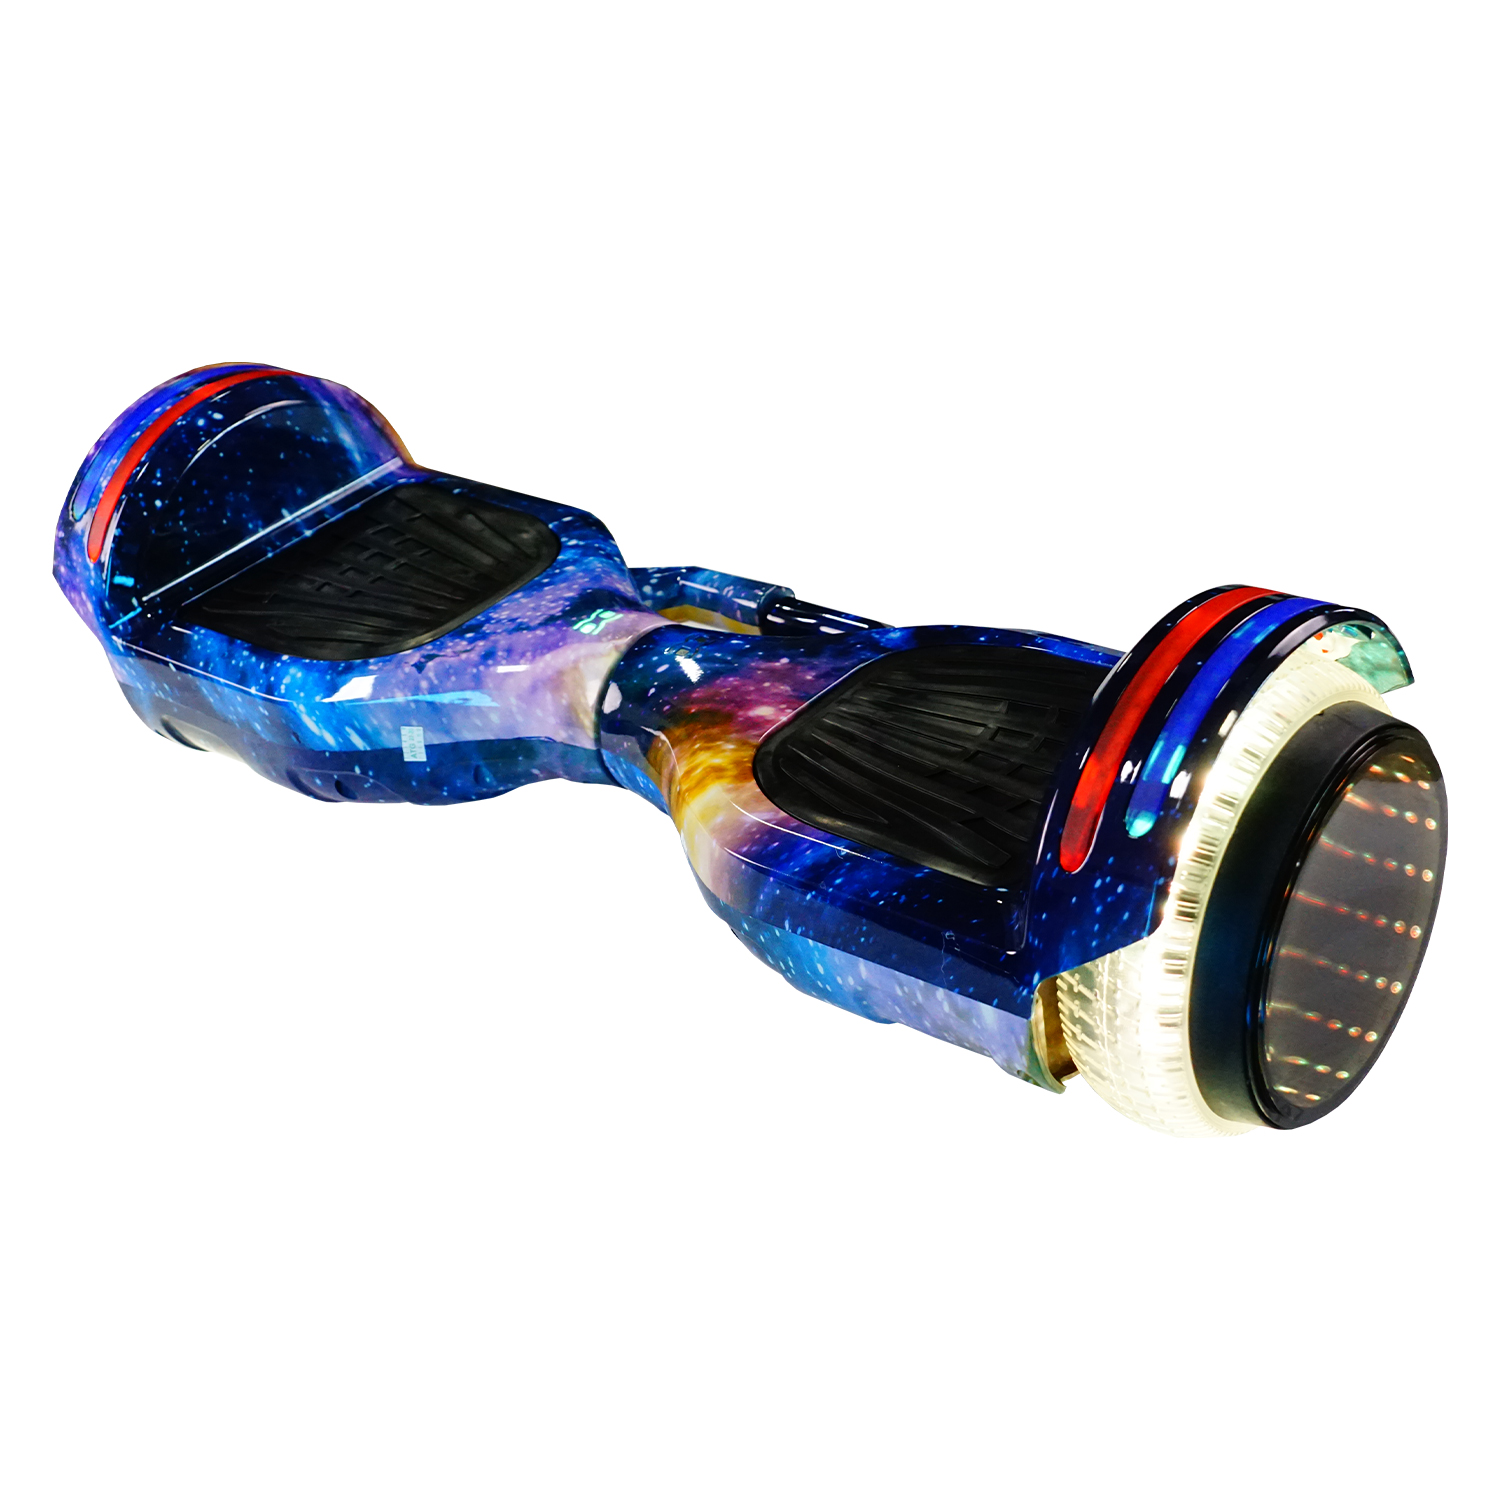 Scooter Elétrico Star Hoverboard LED 3D / 6.5 / Bluetooth / Bolsa - Galaxia